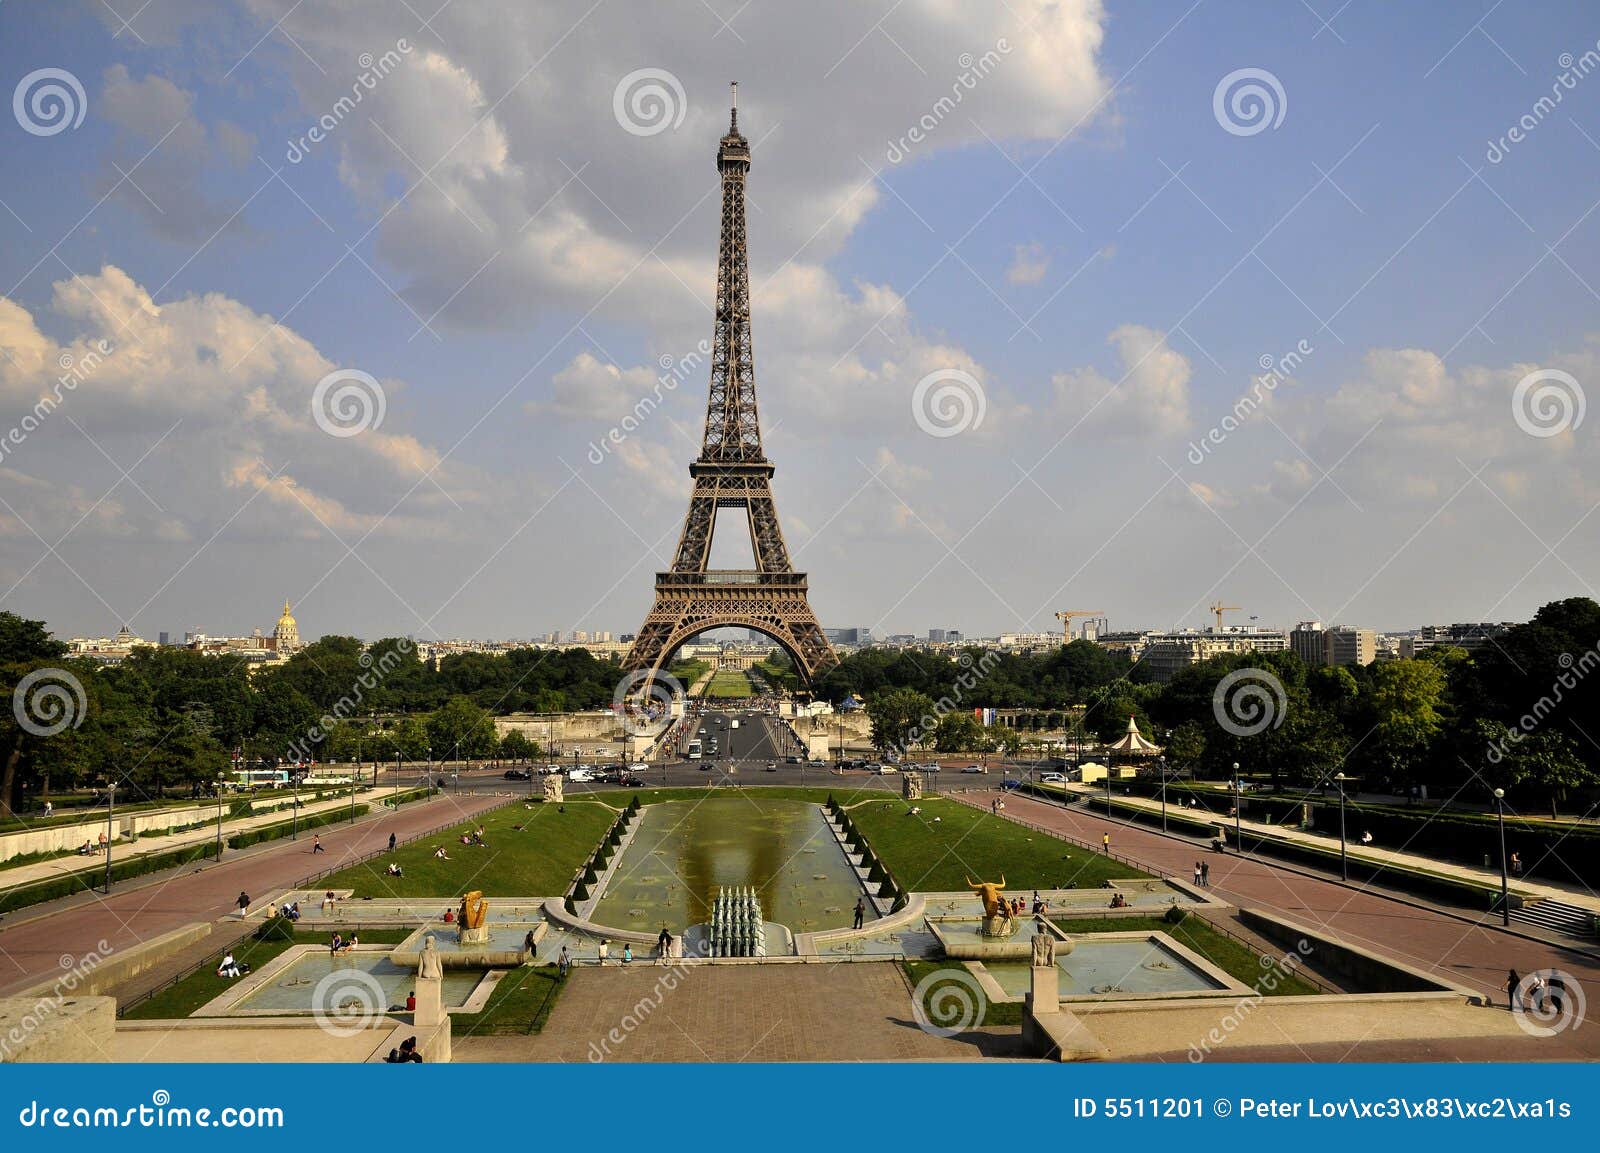 view of eiffel tower from trocadero